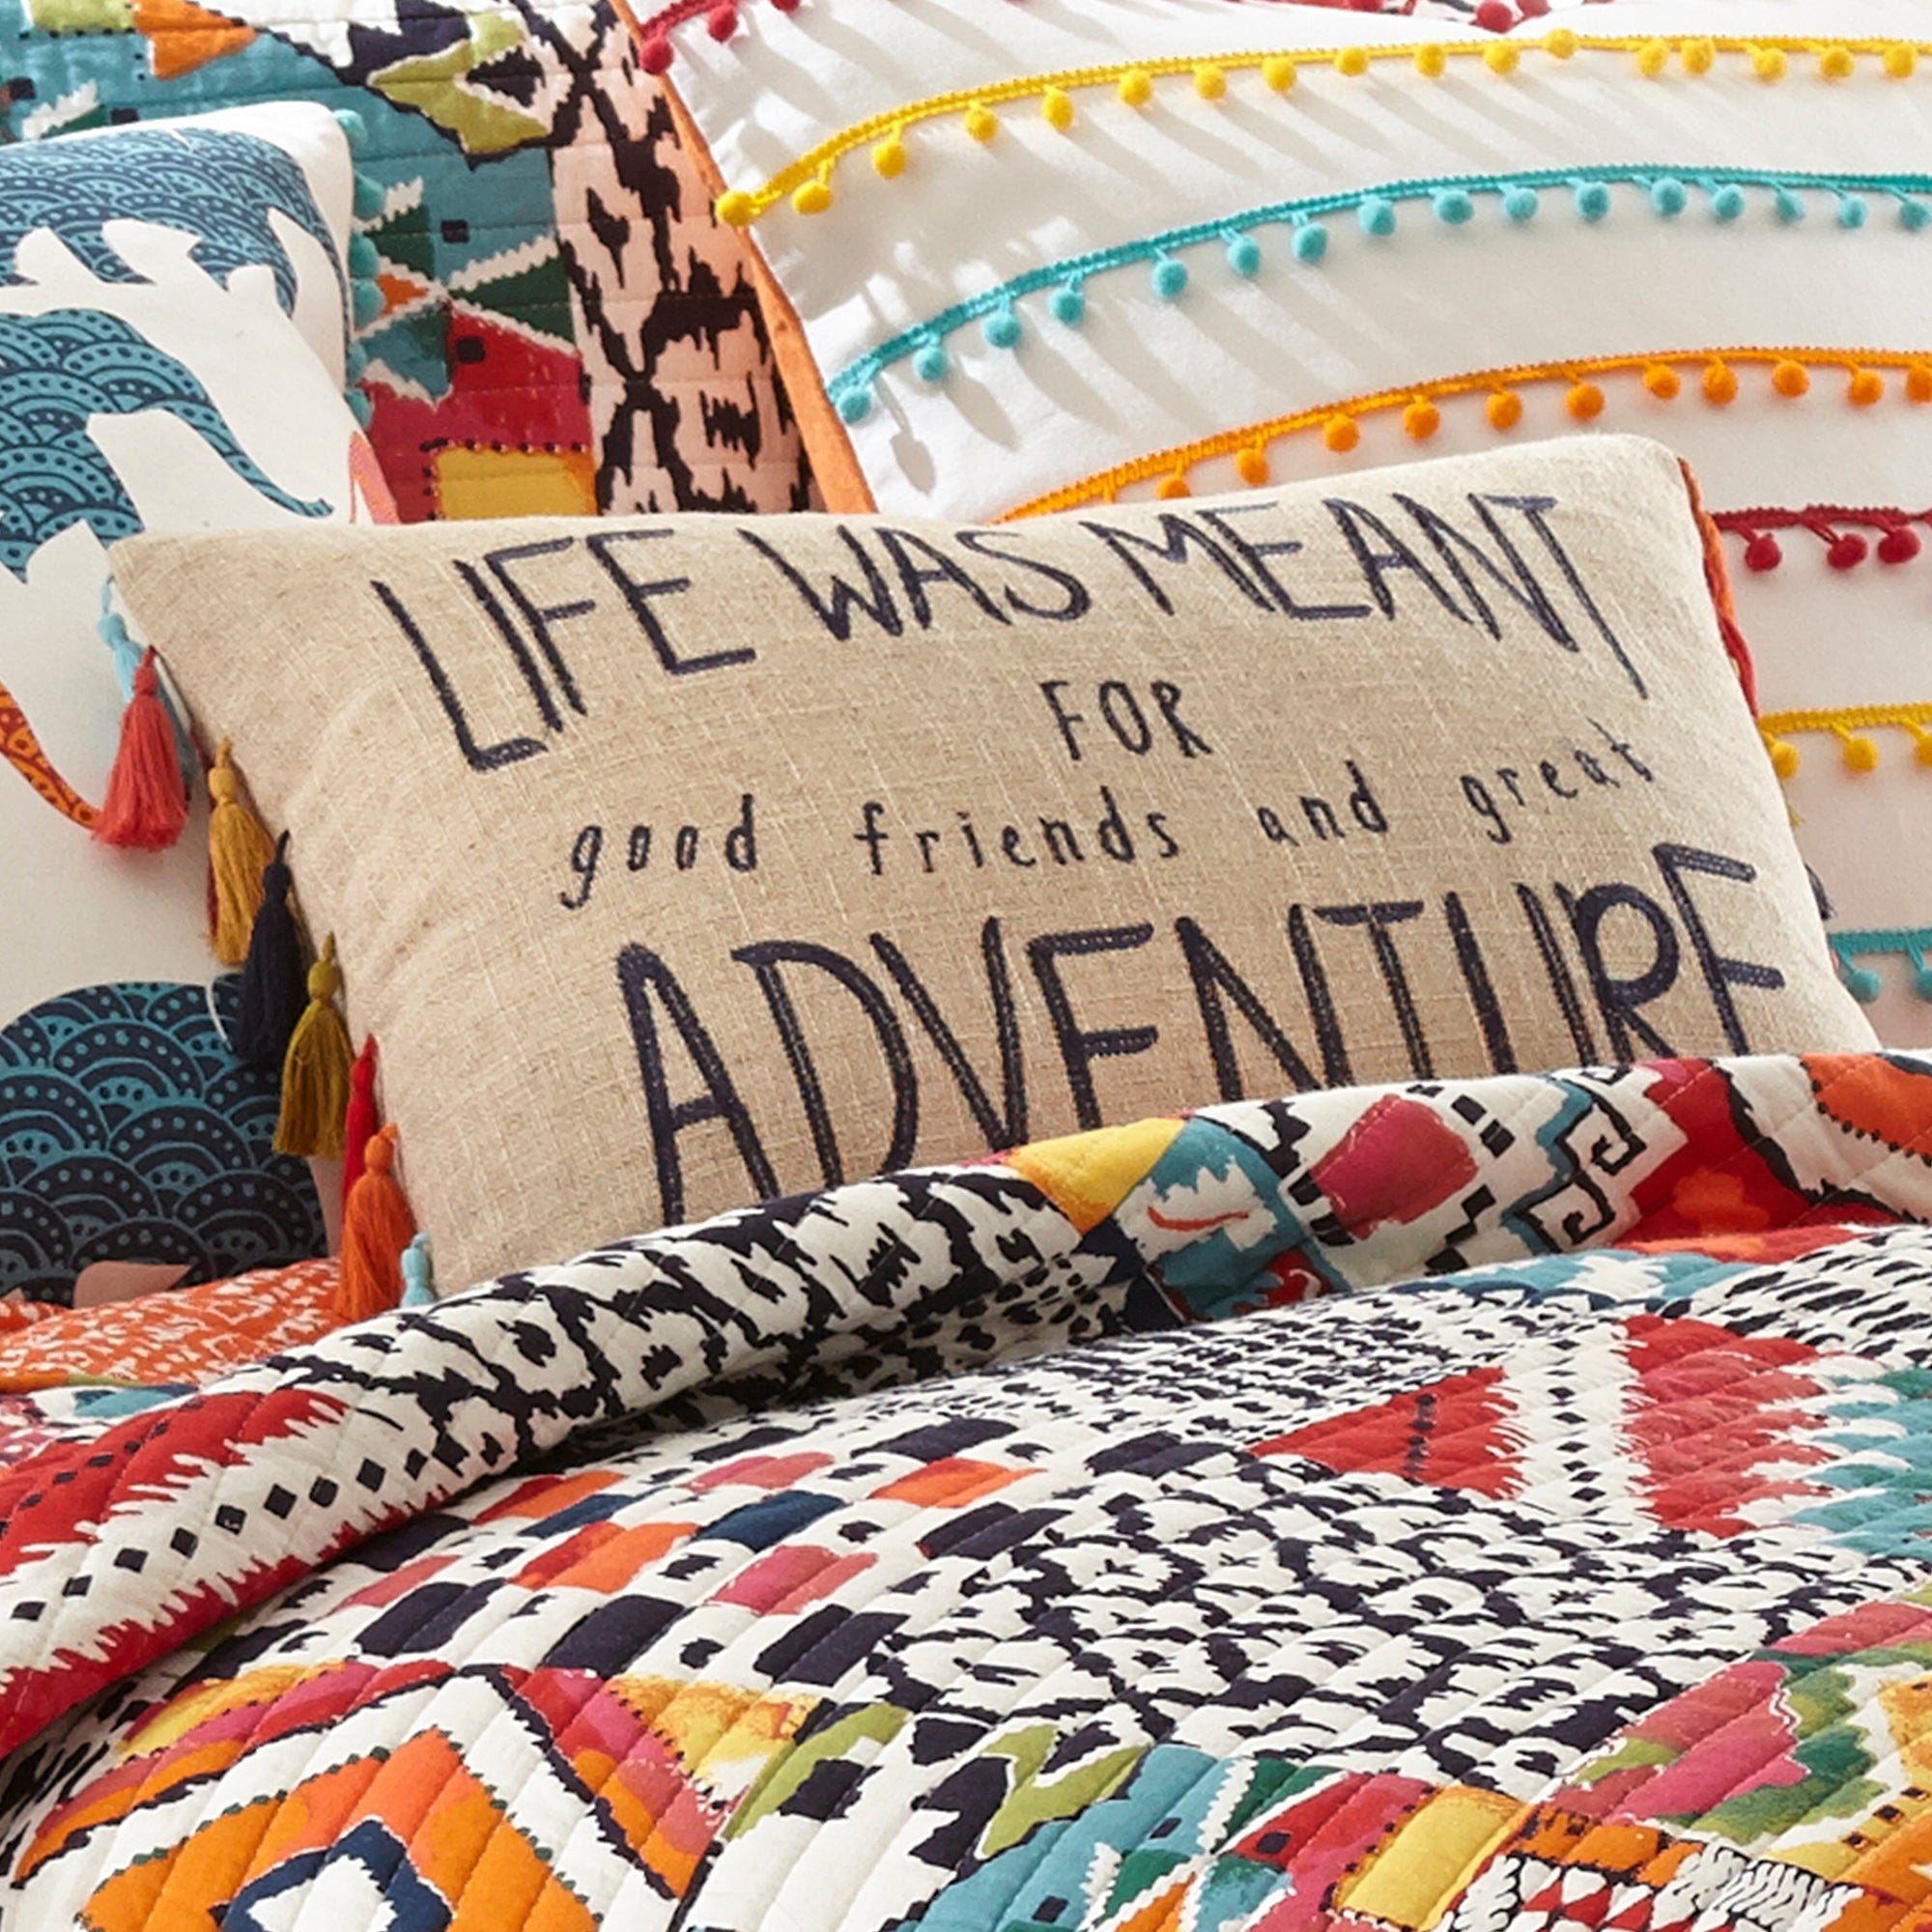 Karia Life Was Meant For Adventure Pillow